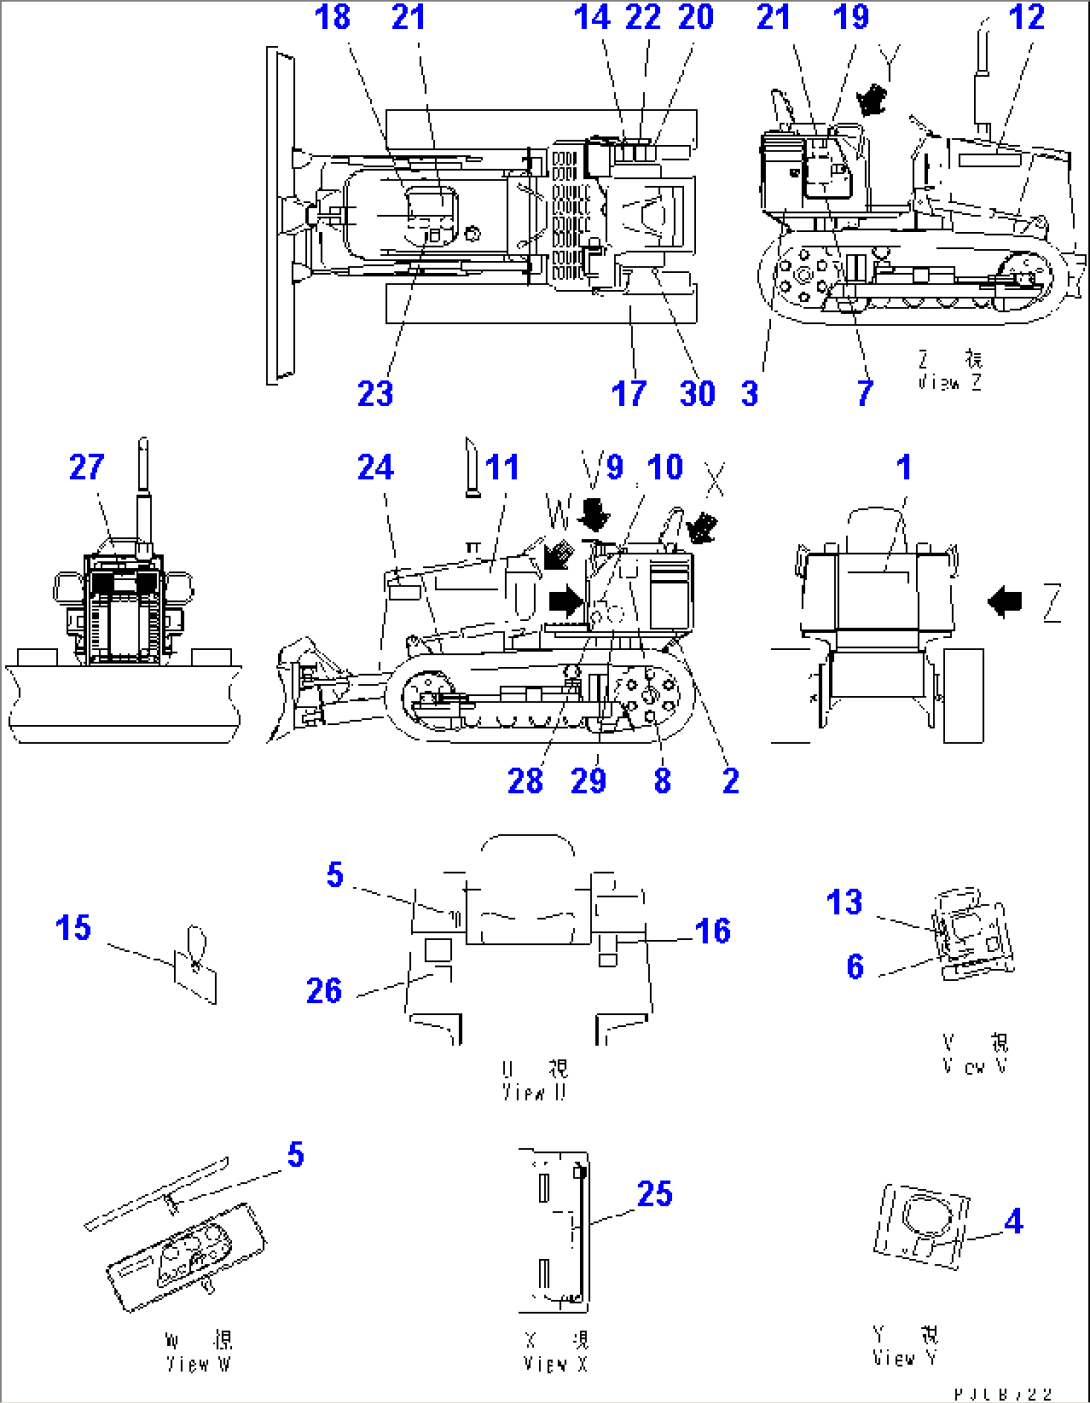 MARKS AND PLATES (JAPANESE) (FOR ANGLE DOZER)